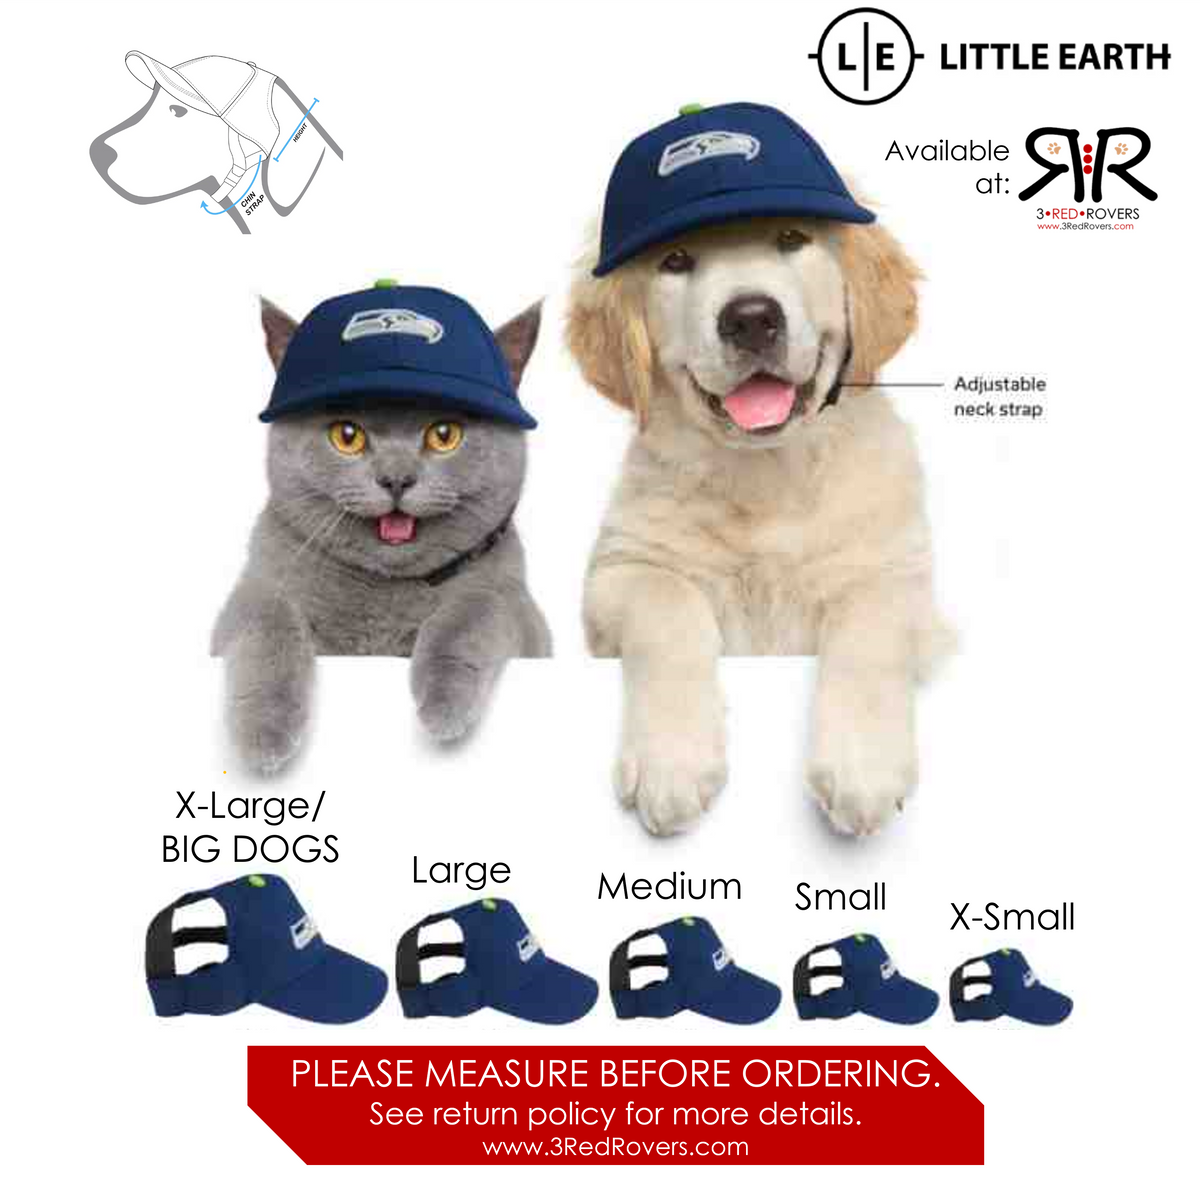 LA Baseball Cap For Dogs - Caps For Dogs